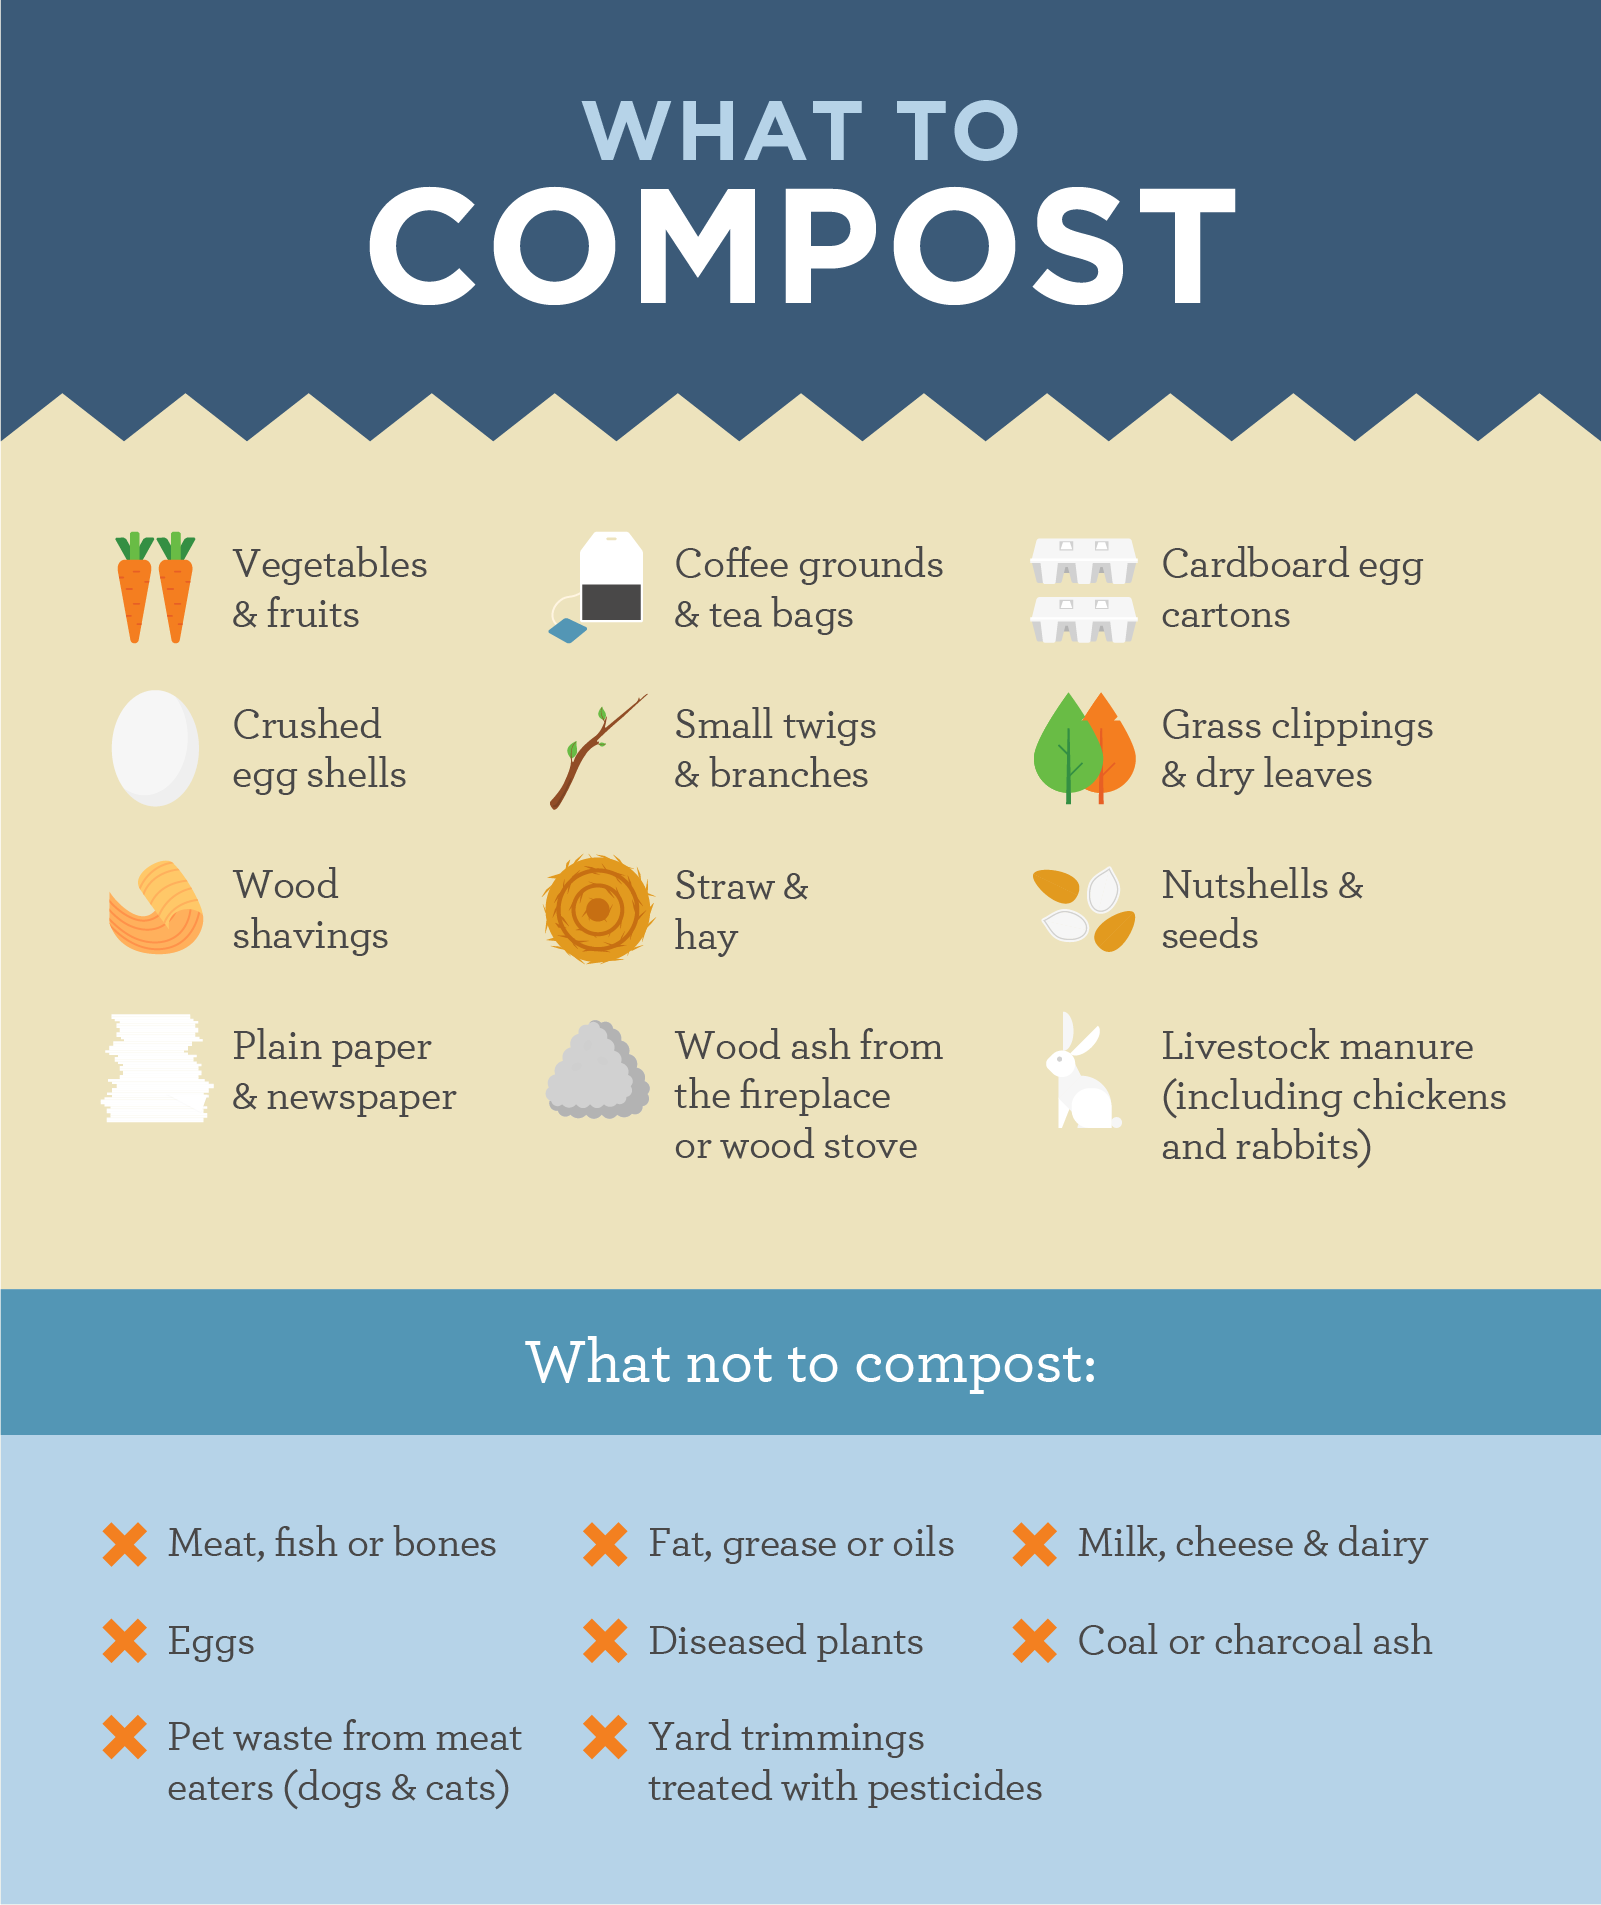 https://extramile.thehartford.com/wp-content/uploads/2020/08/What_To_Compost.png